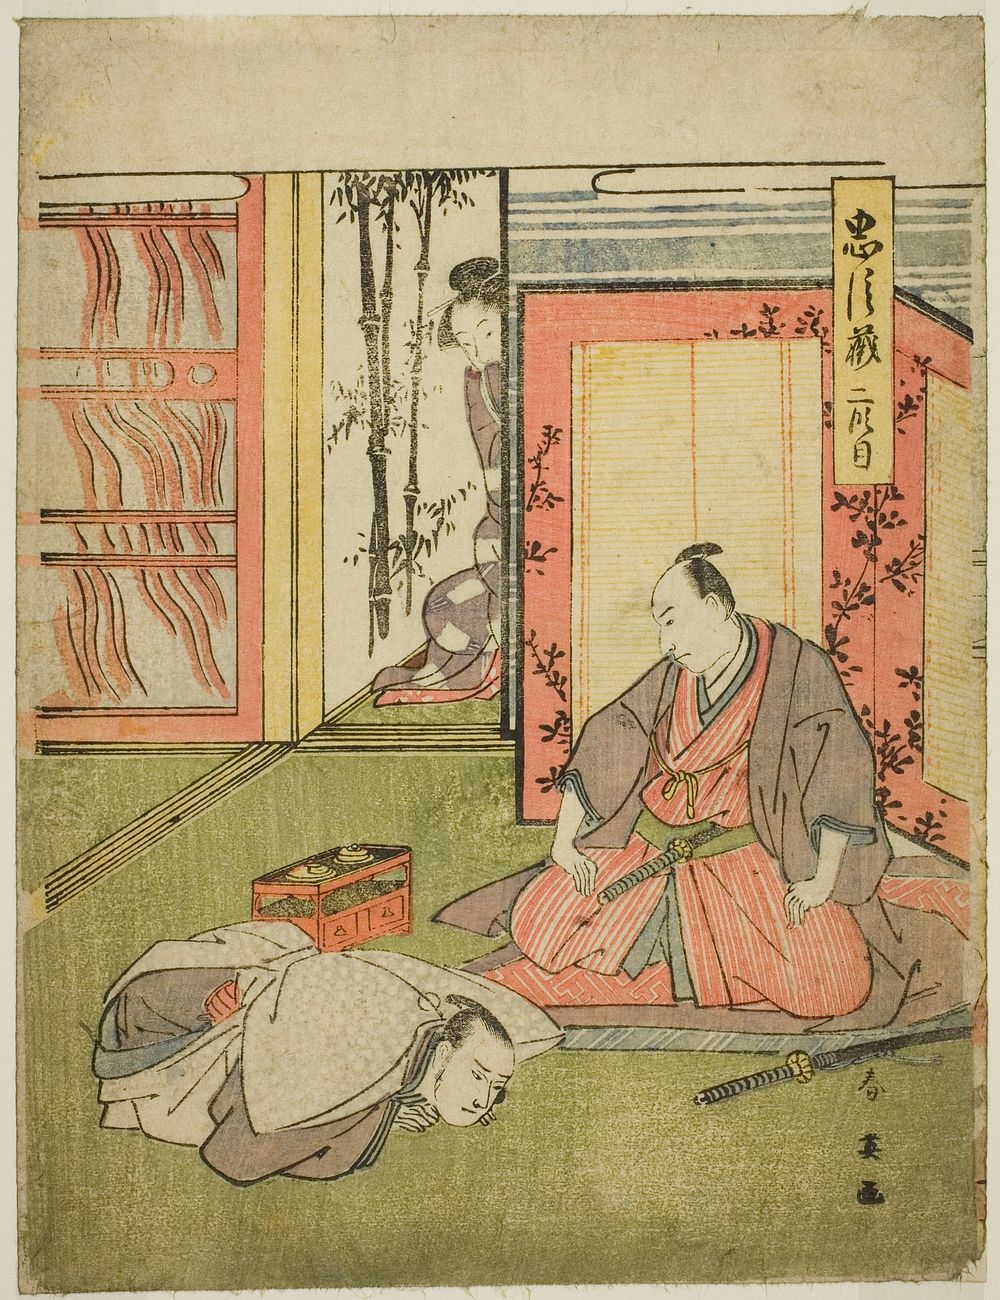 Act Two: The Quarters of Momonoi Wakasanosuke from the play Chushingura (Treasury of the Forty-seven Loyal Retainers) by…